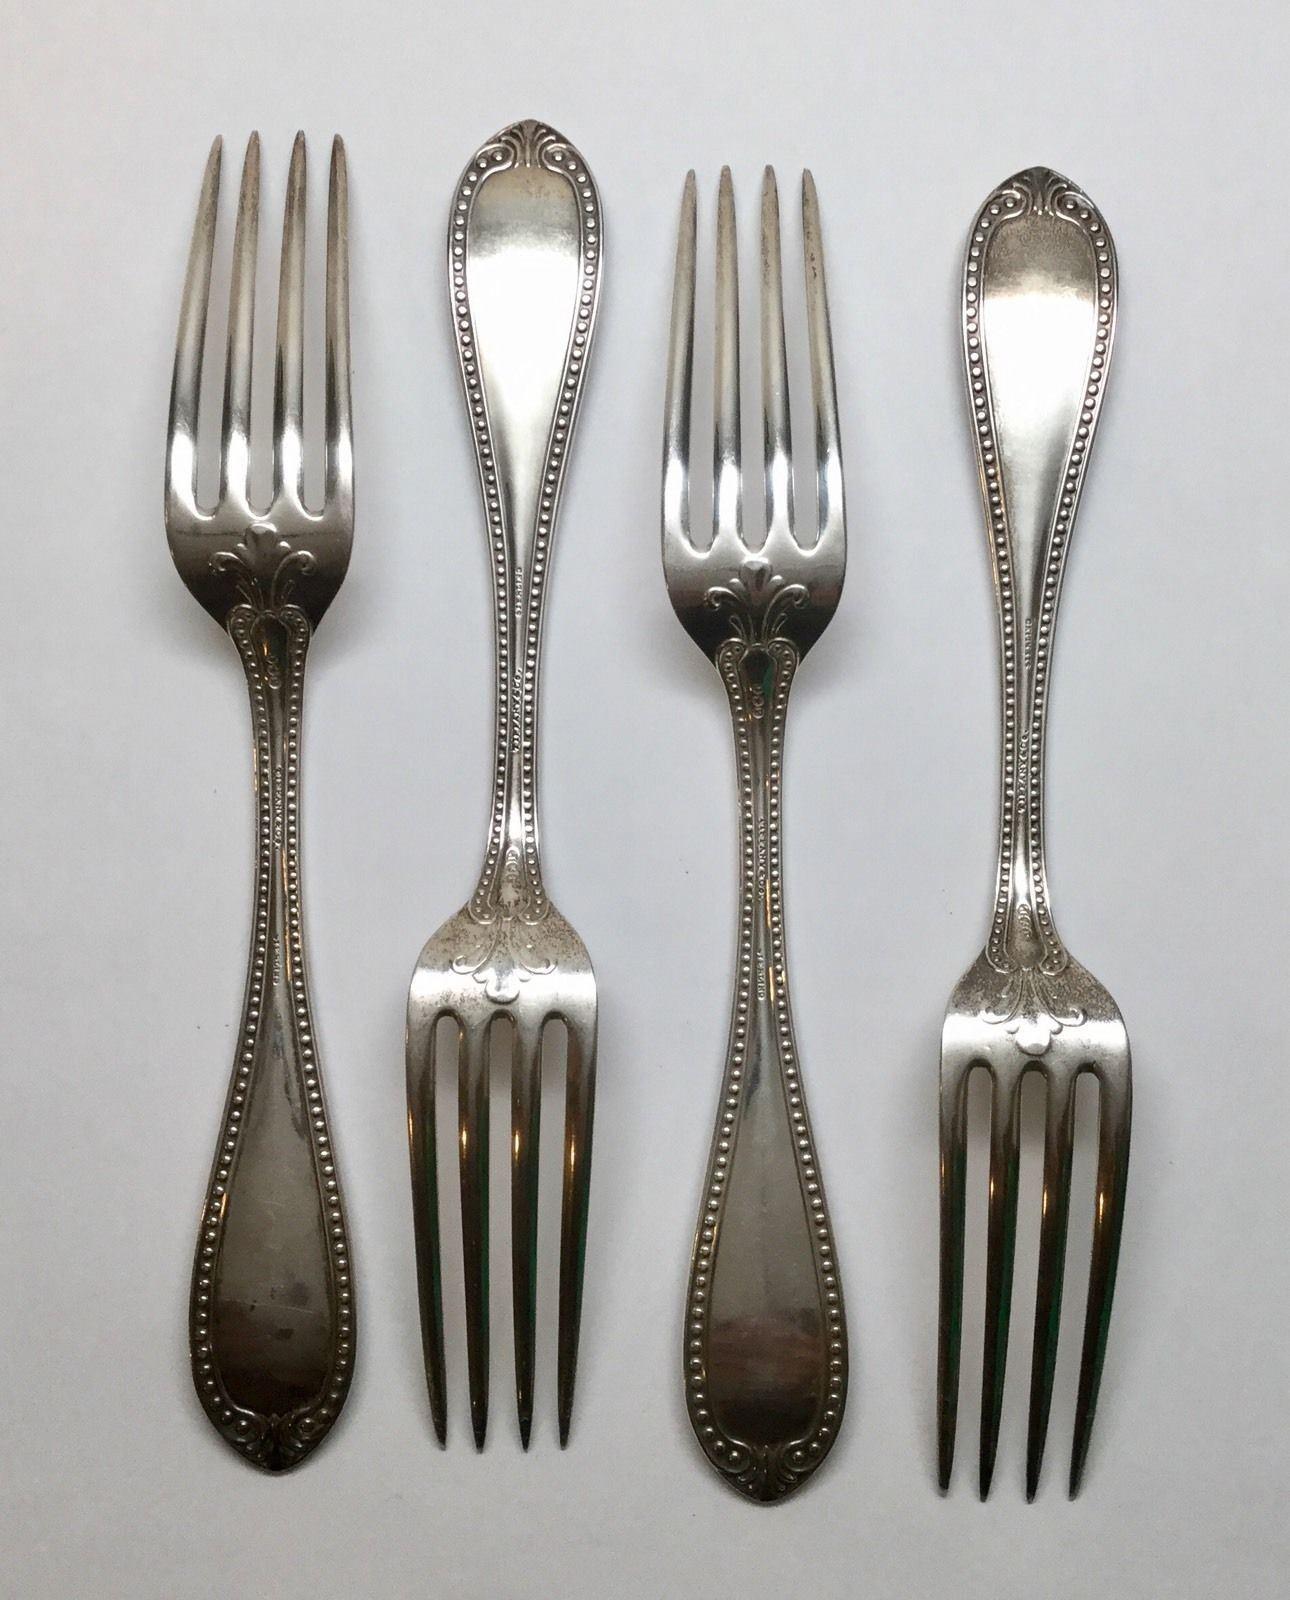 4 John Polhamus for Tiffany & Co. sterling silver forks in the 1850 Bead pattern. Marked: J*P, TIFFANY & CO., STERLING. Engraved on handle: Louisa Le Huray. Measures: 7 3/4